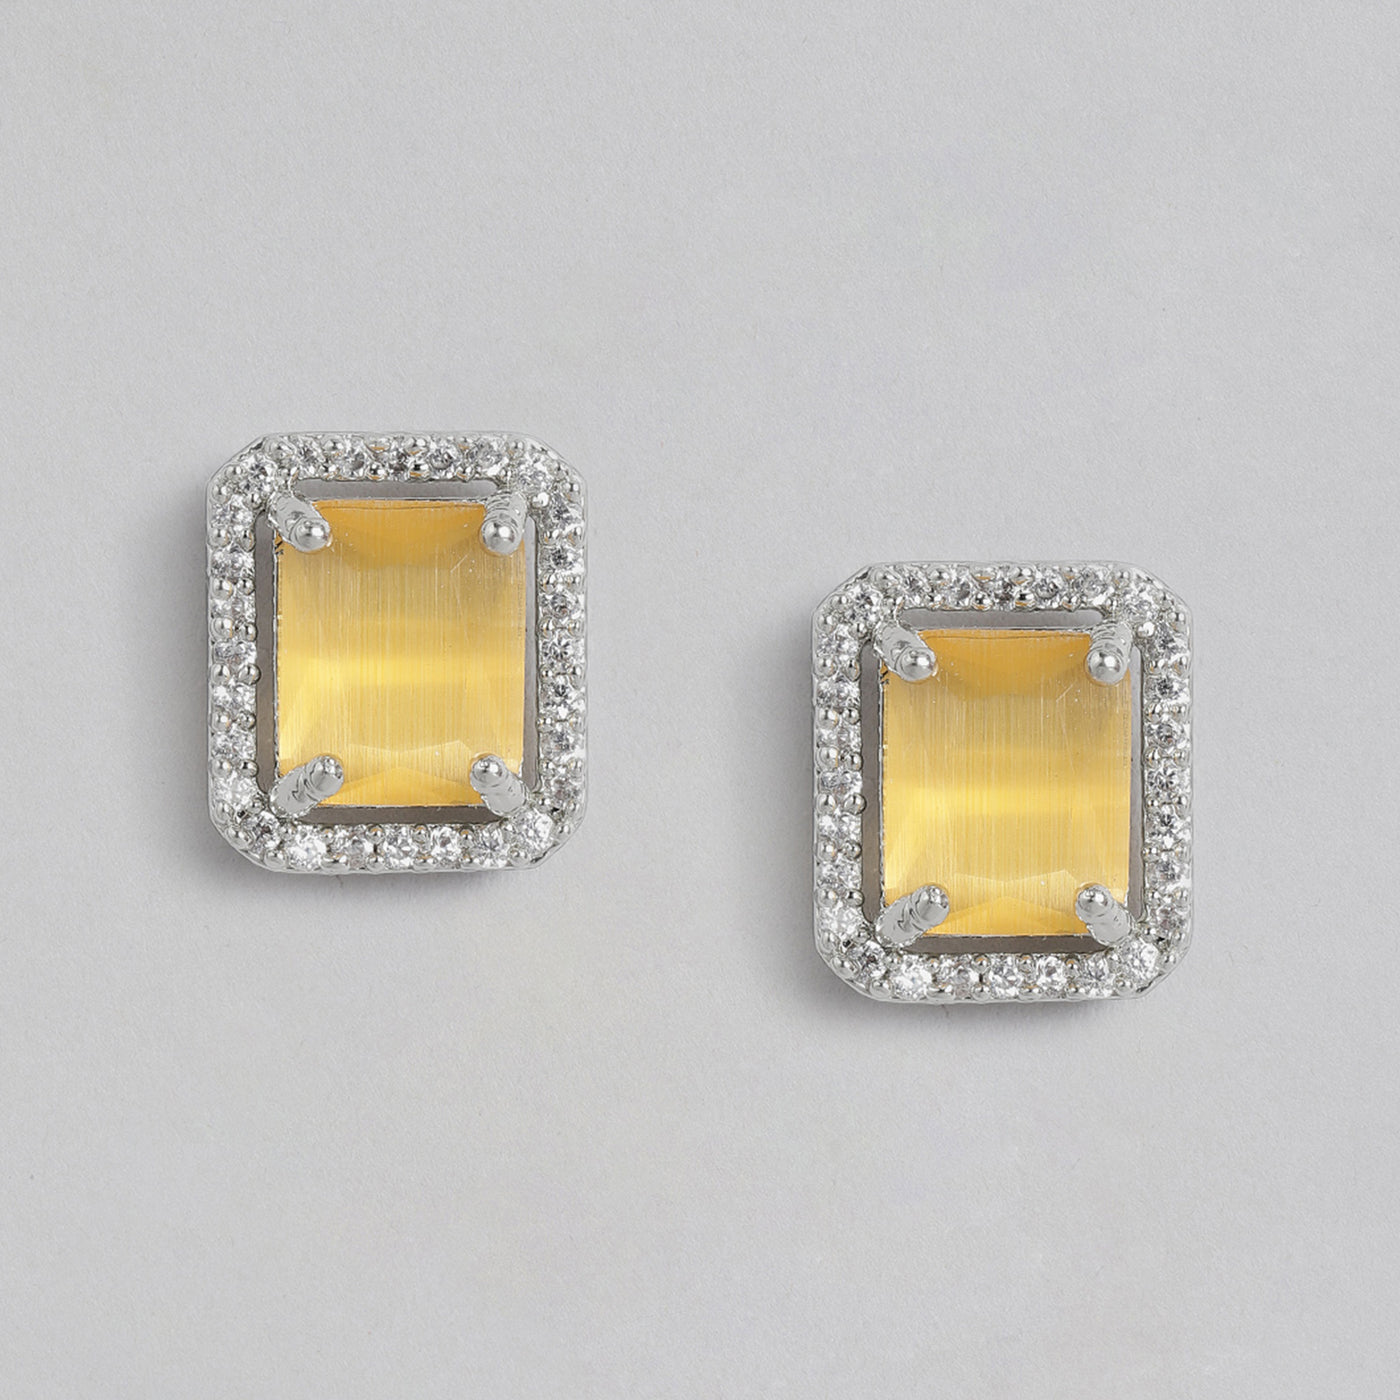 Estele Rhodium Plated CZ Sparkling Square Designer Pendant Set with Yellow Crystals for Women